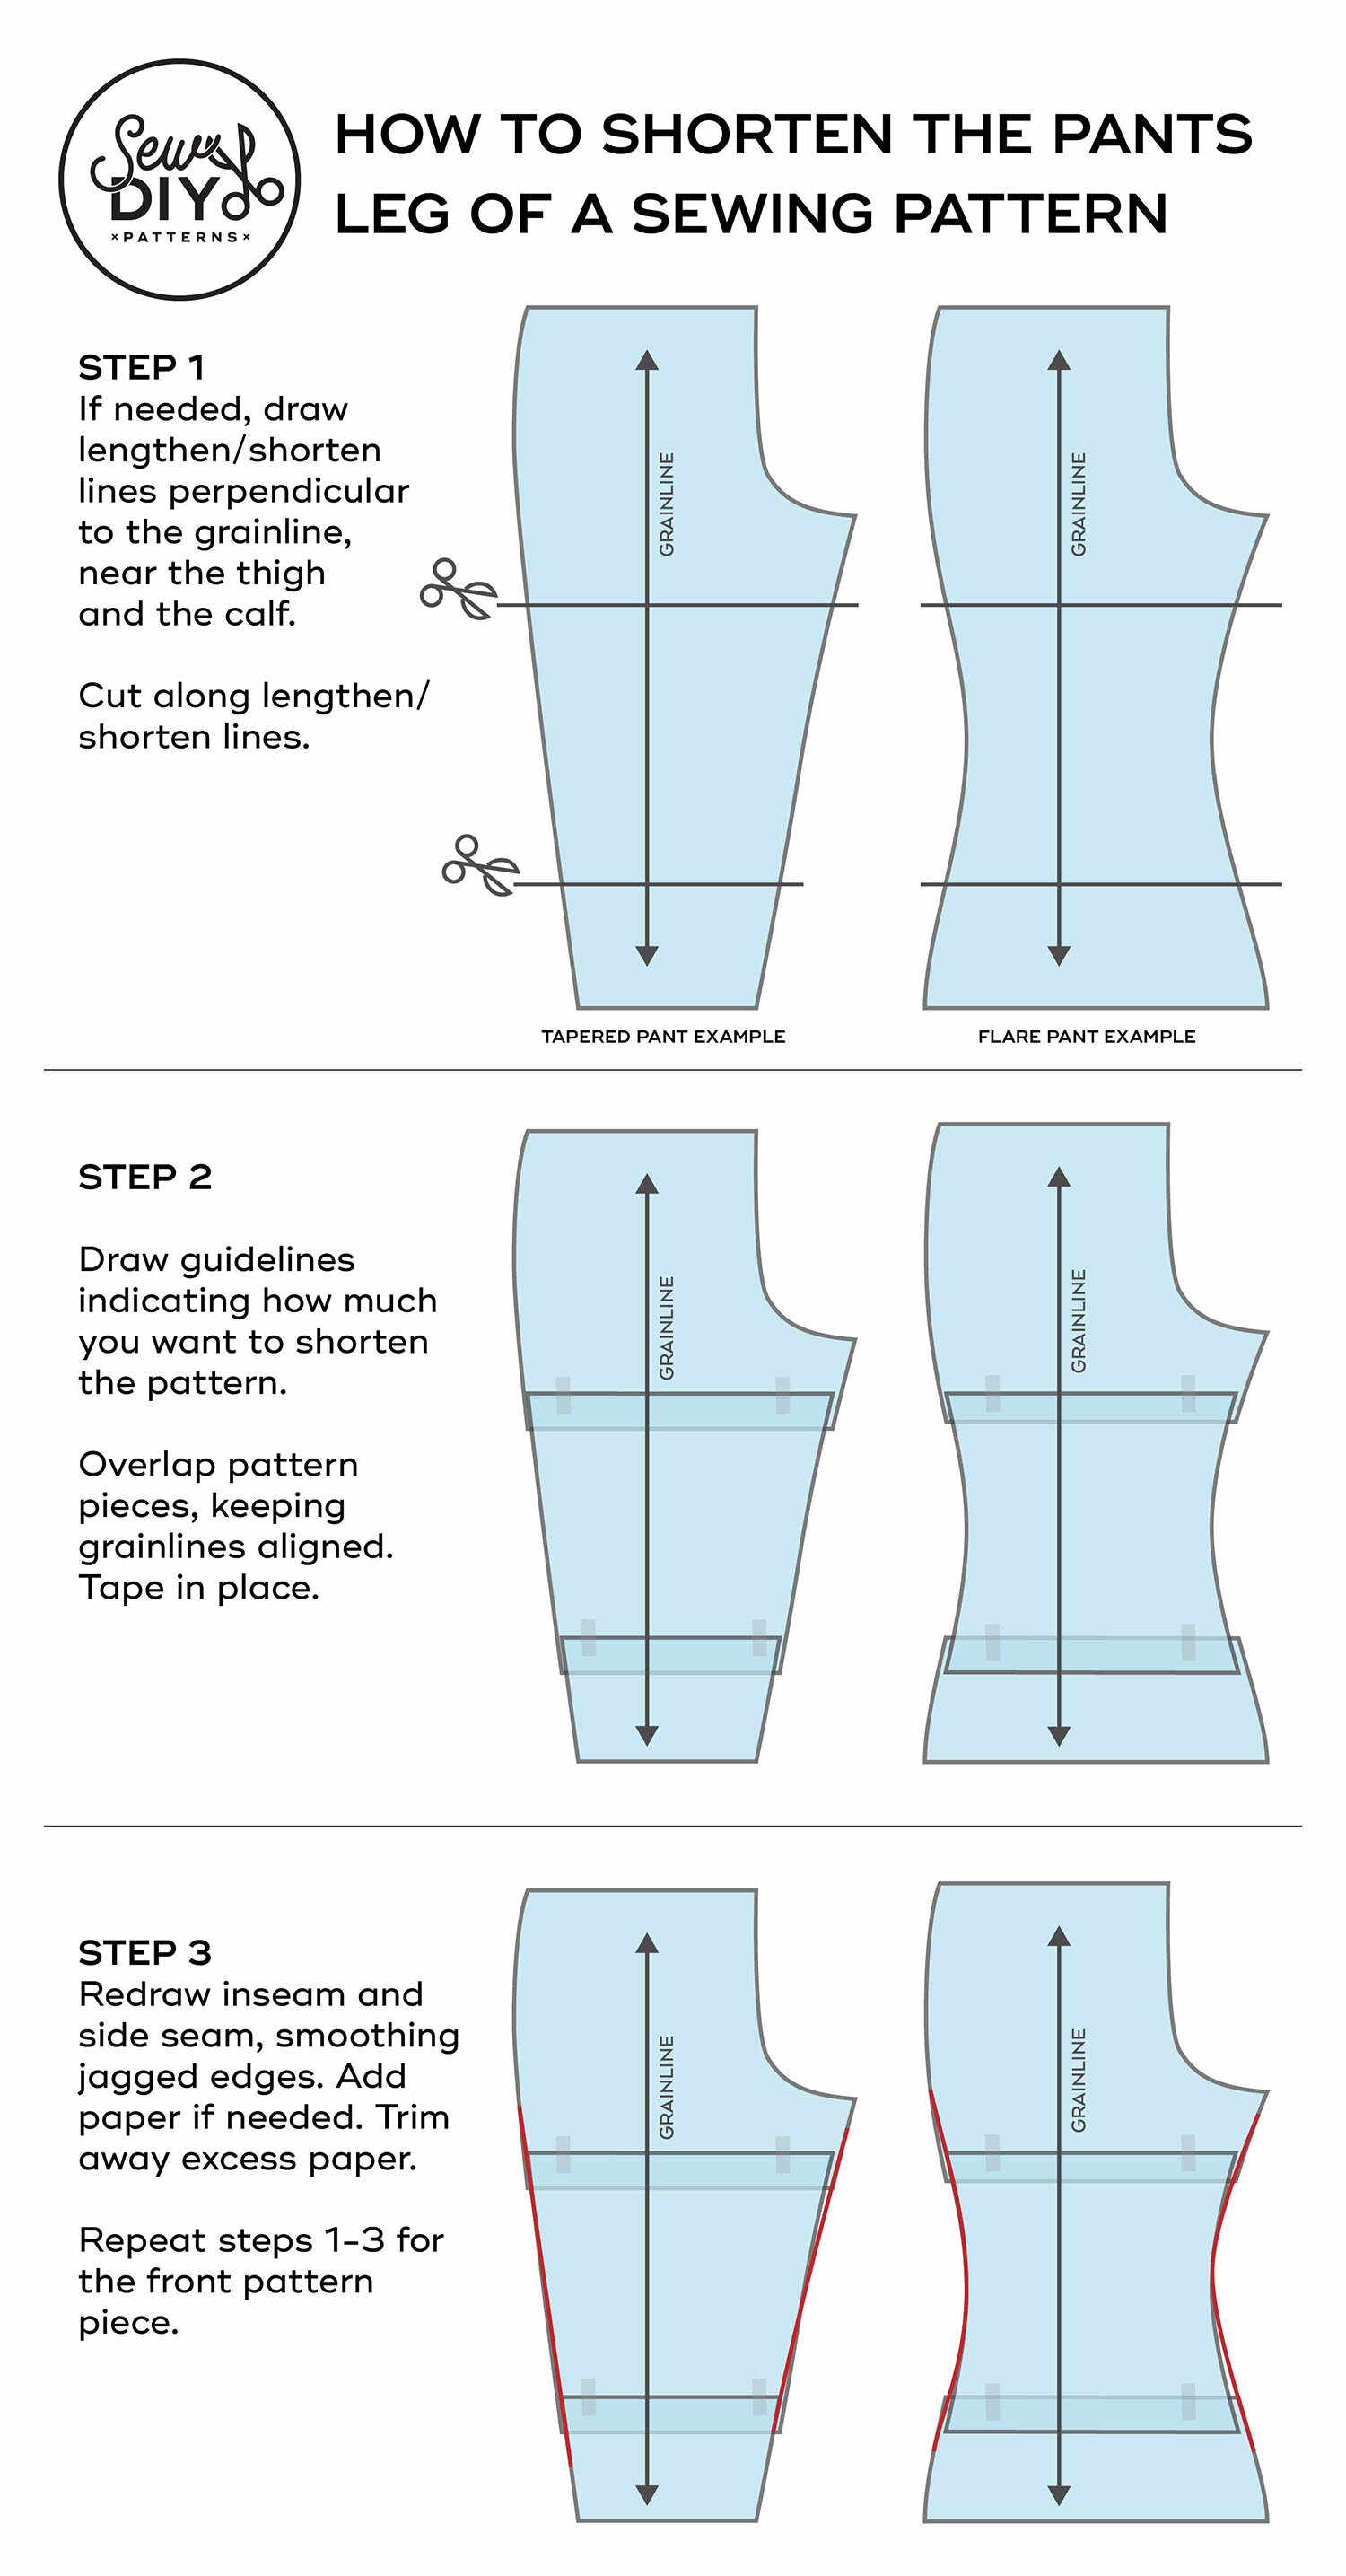 How to shorten or lengthen the legs of a pants pattern - Video tutorial —  Sew DIY